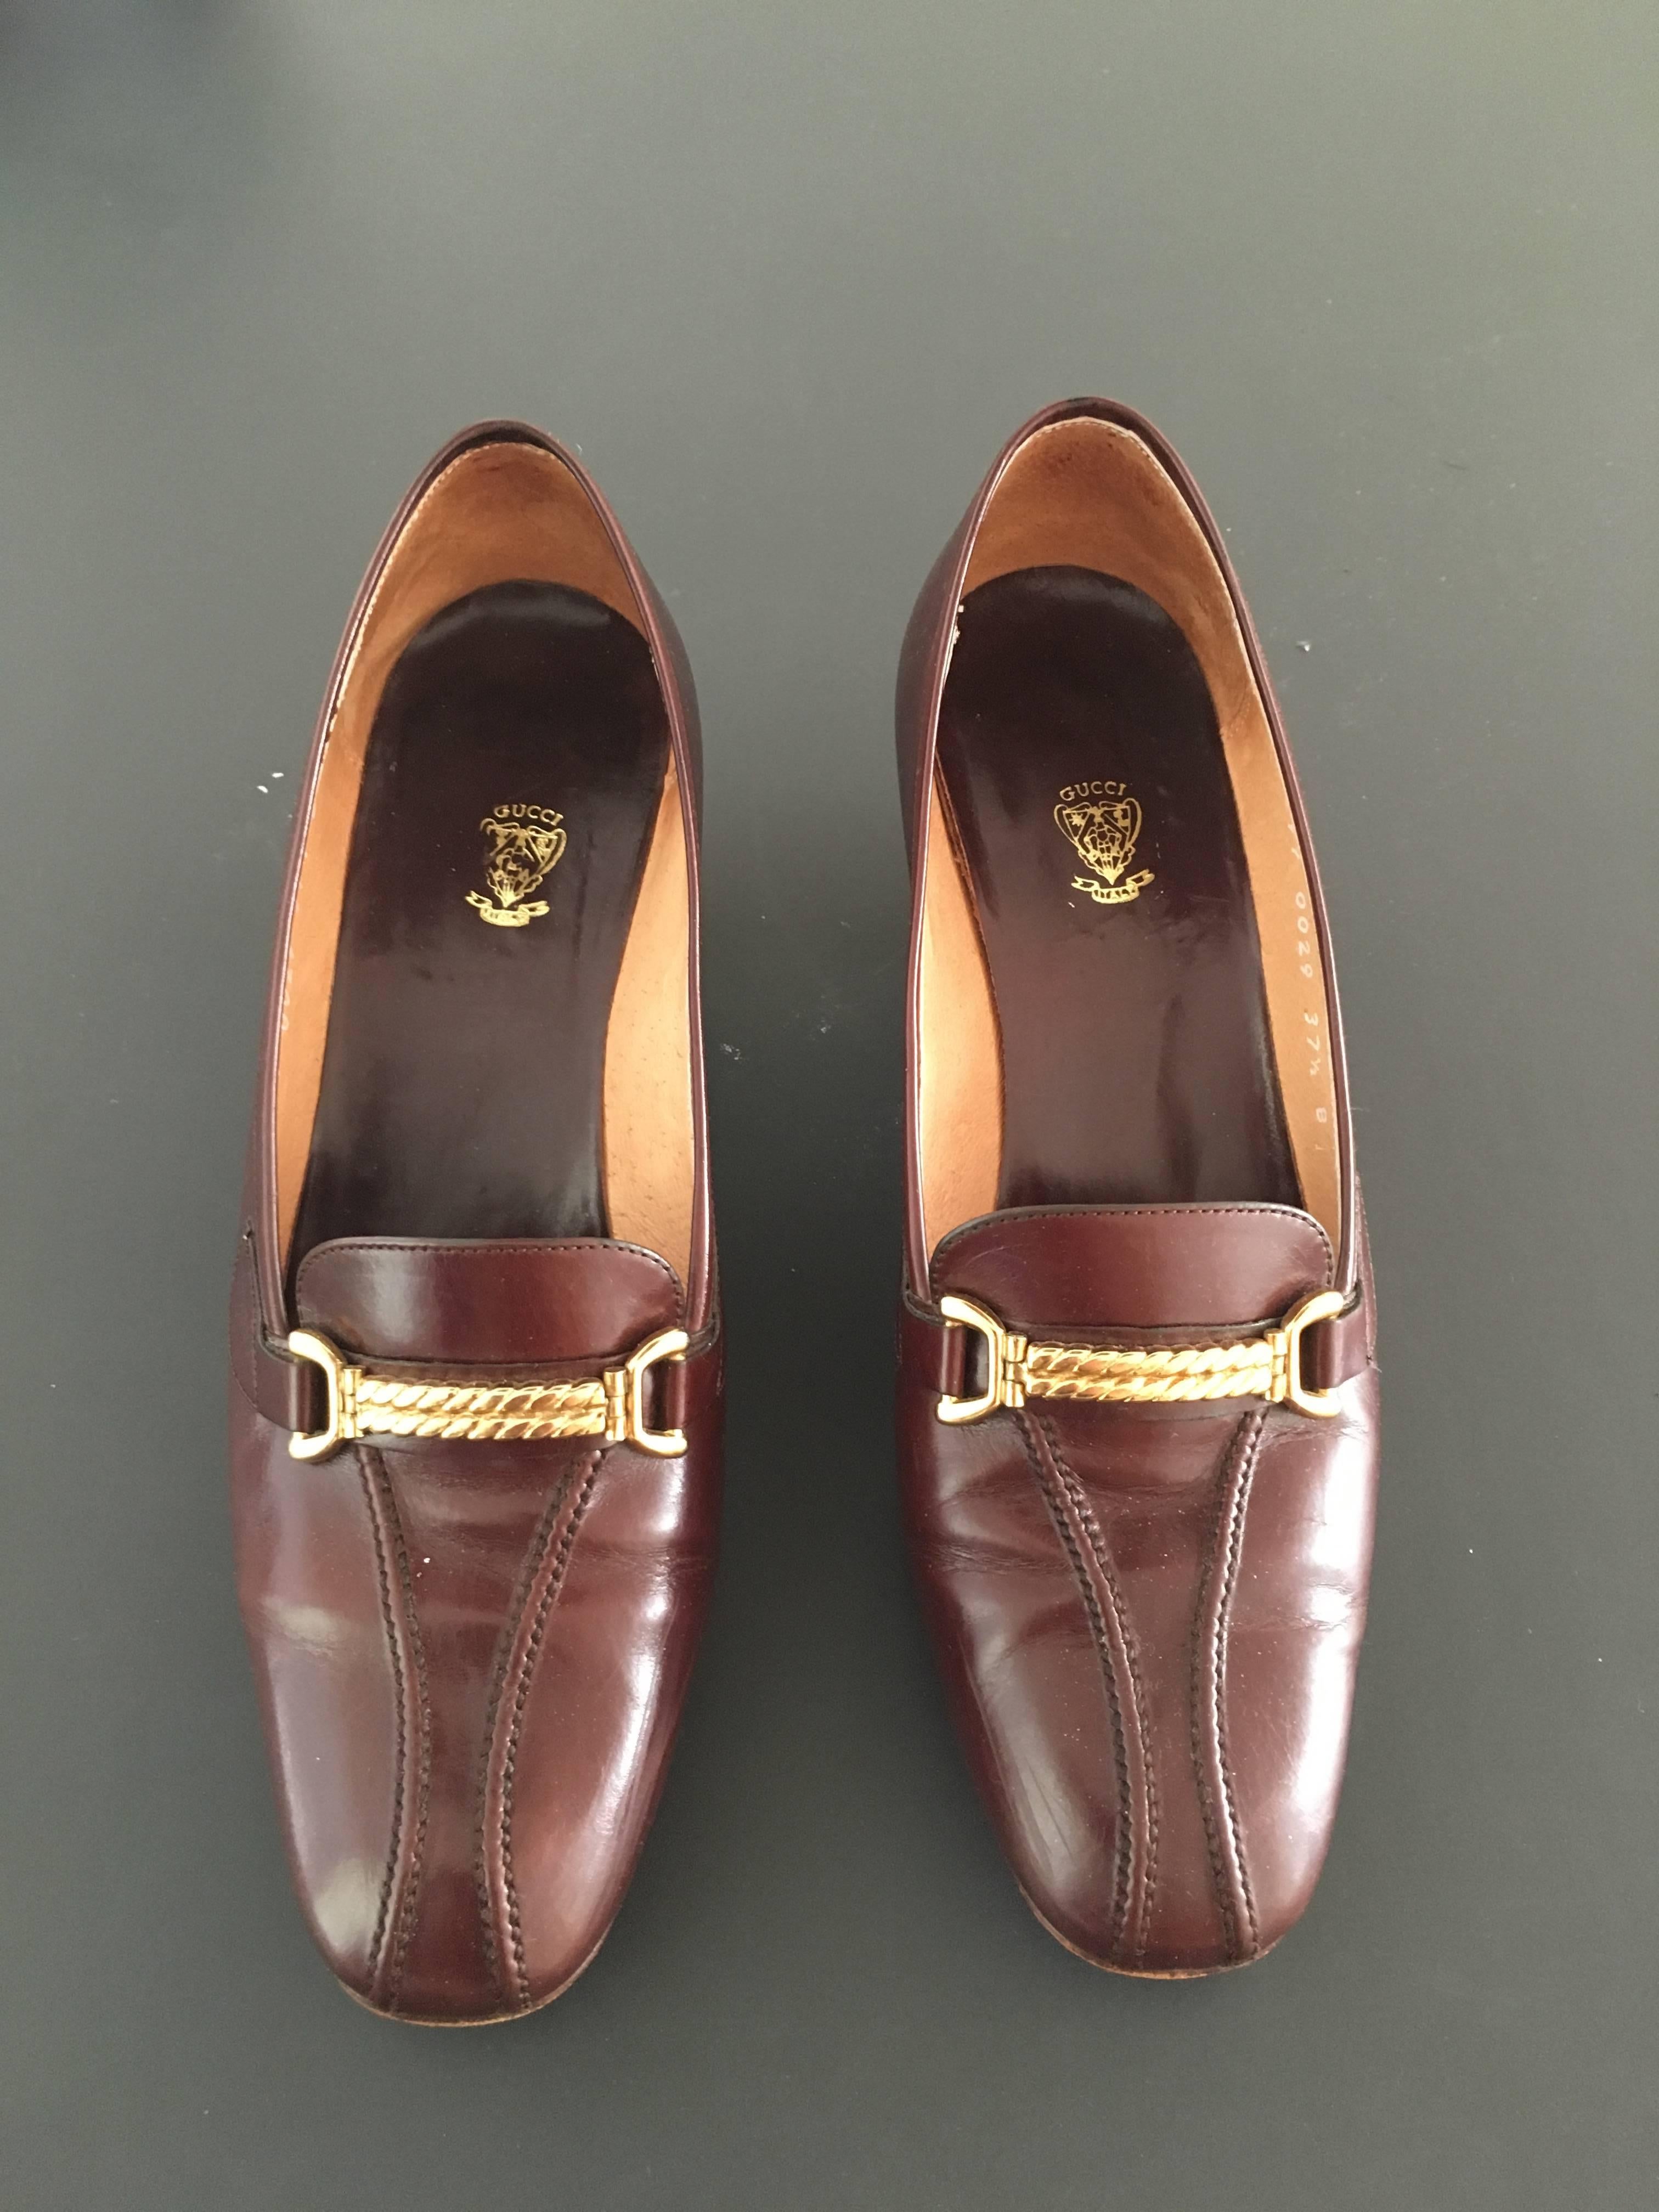 Gucci 1970s brown leather heeled loafers is marked 37.1/2 B and fits an USA women's size 7. The woman who consigned these shoes wears a size 7 and these fit her perfectly.  Wear these classic Gucci loafers with jeans, pants, skirts or suits.